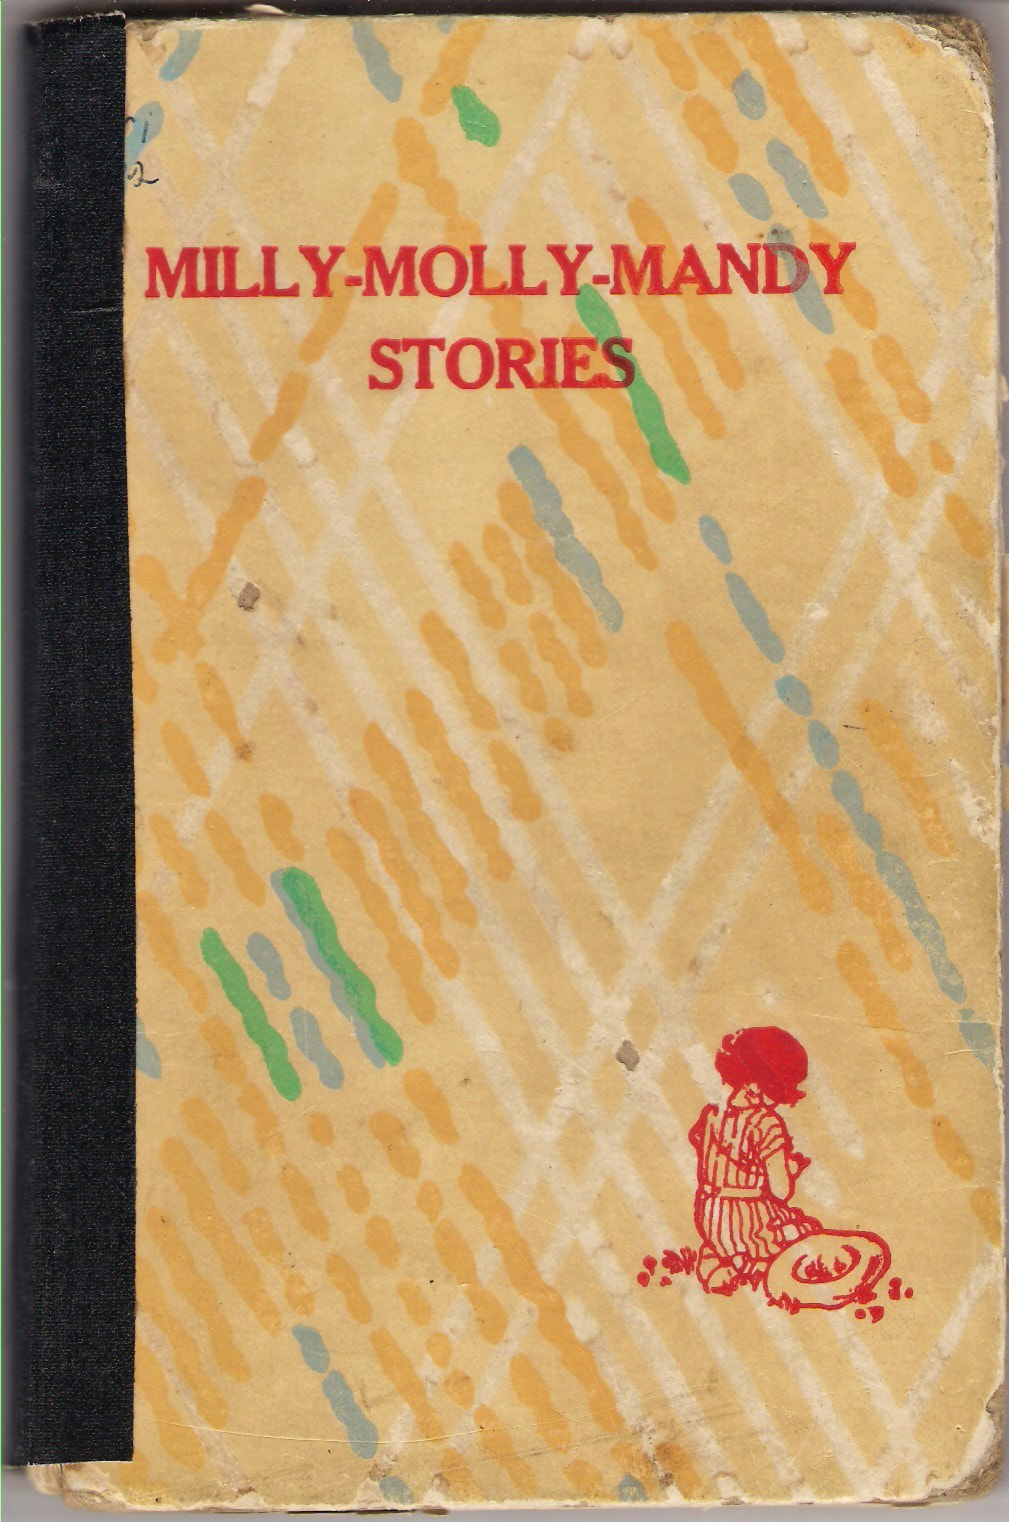 Milly, Molly, Mandy stories